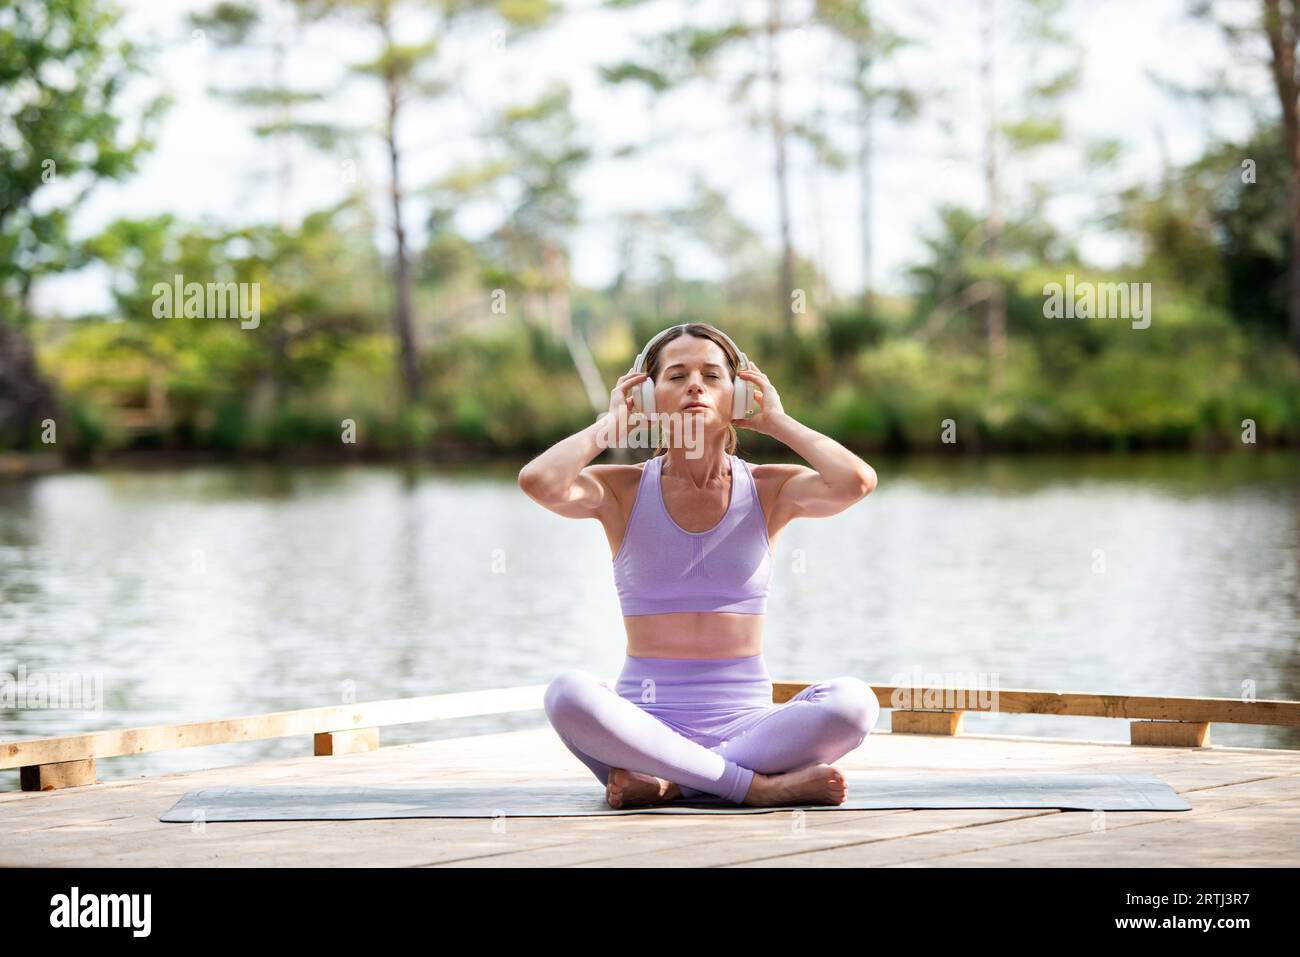 Sporty woman sitting on a jetty by a lake, resting after exercise listening to music on headphones, part of series. Stock Photo